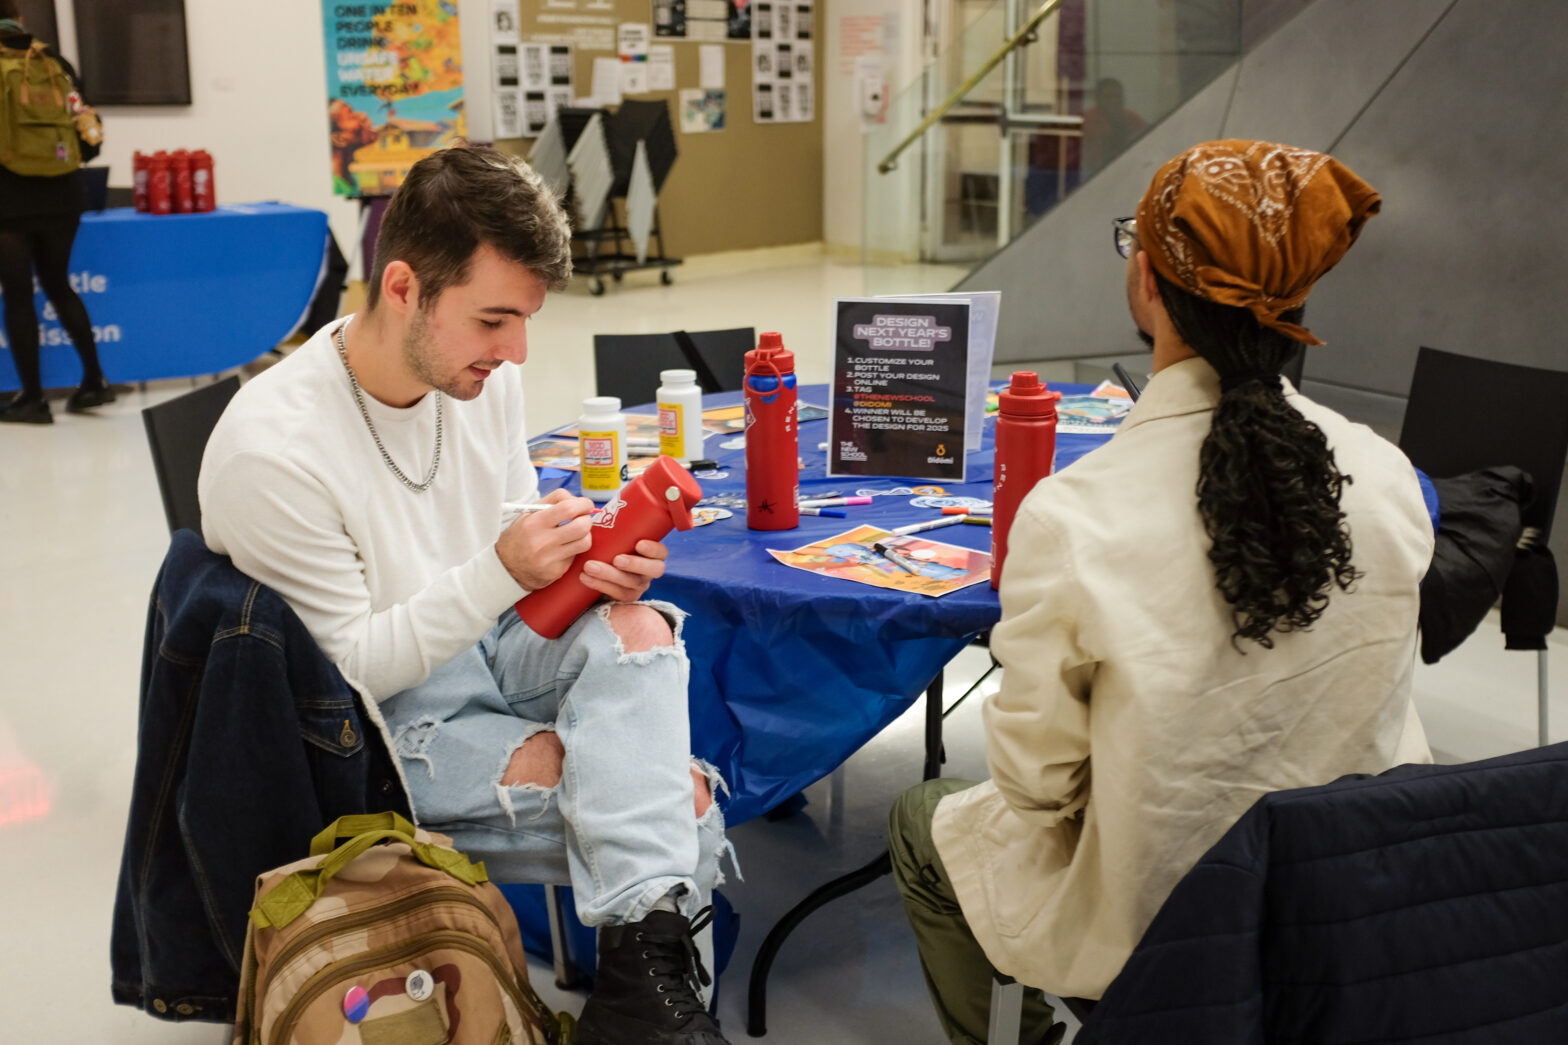 Two students sit at the water bottle customization table in the University Center’s event cafe, surrounded by red bottles and craft supplies.